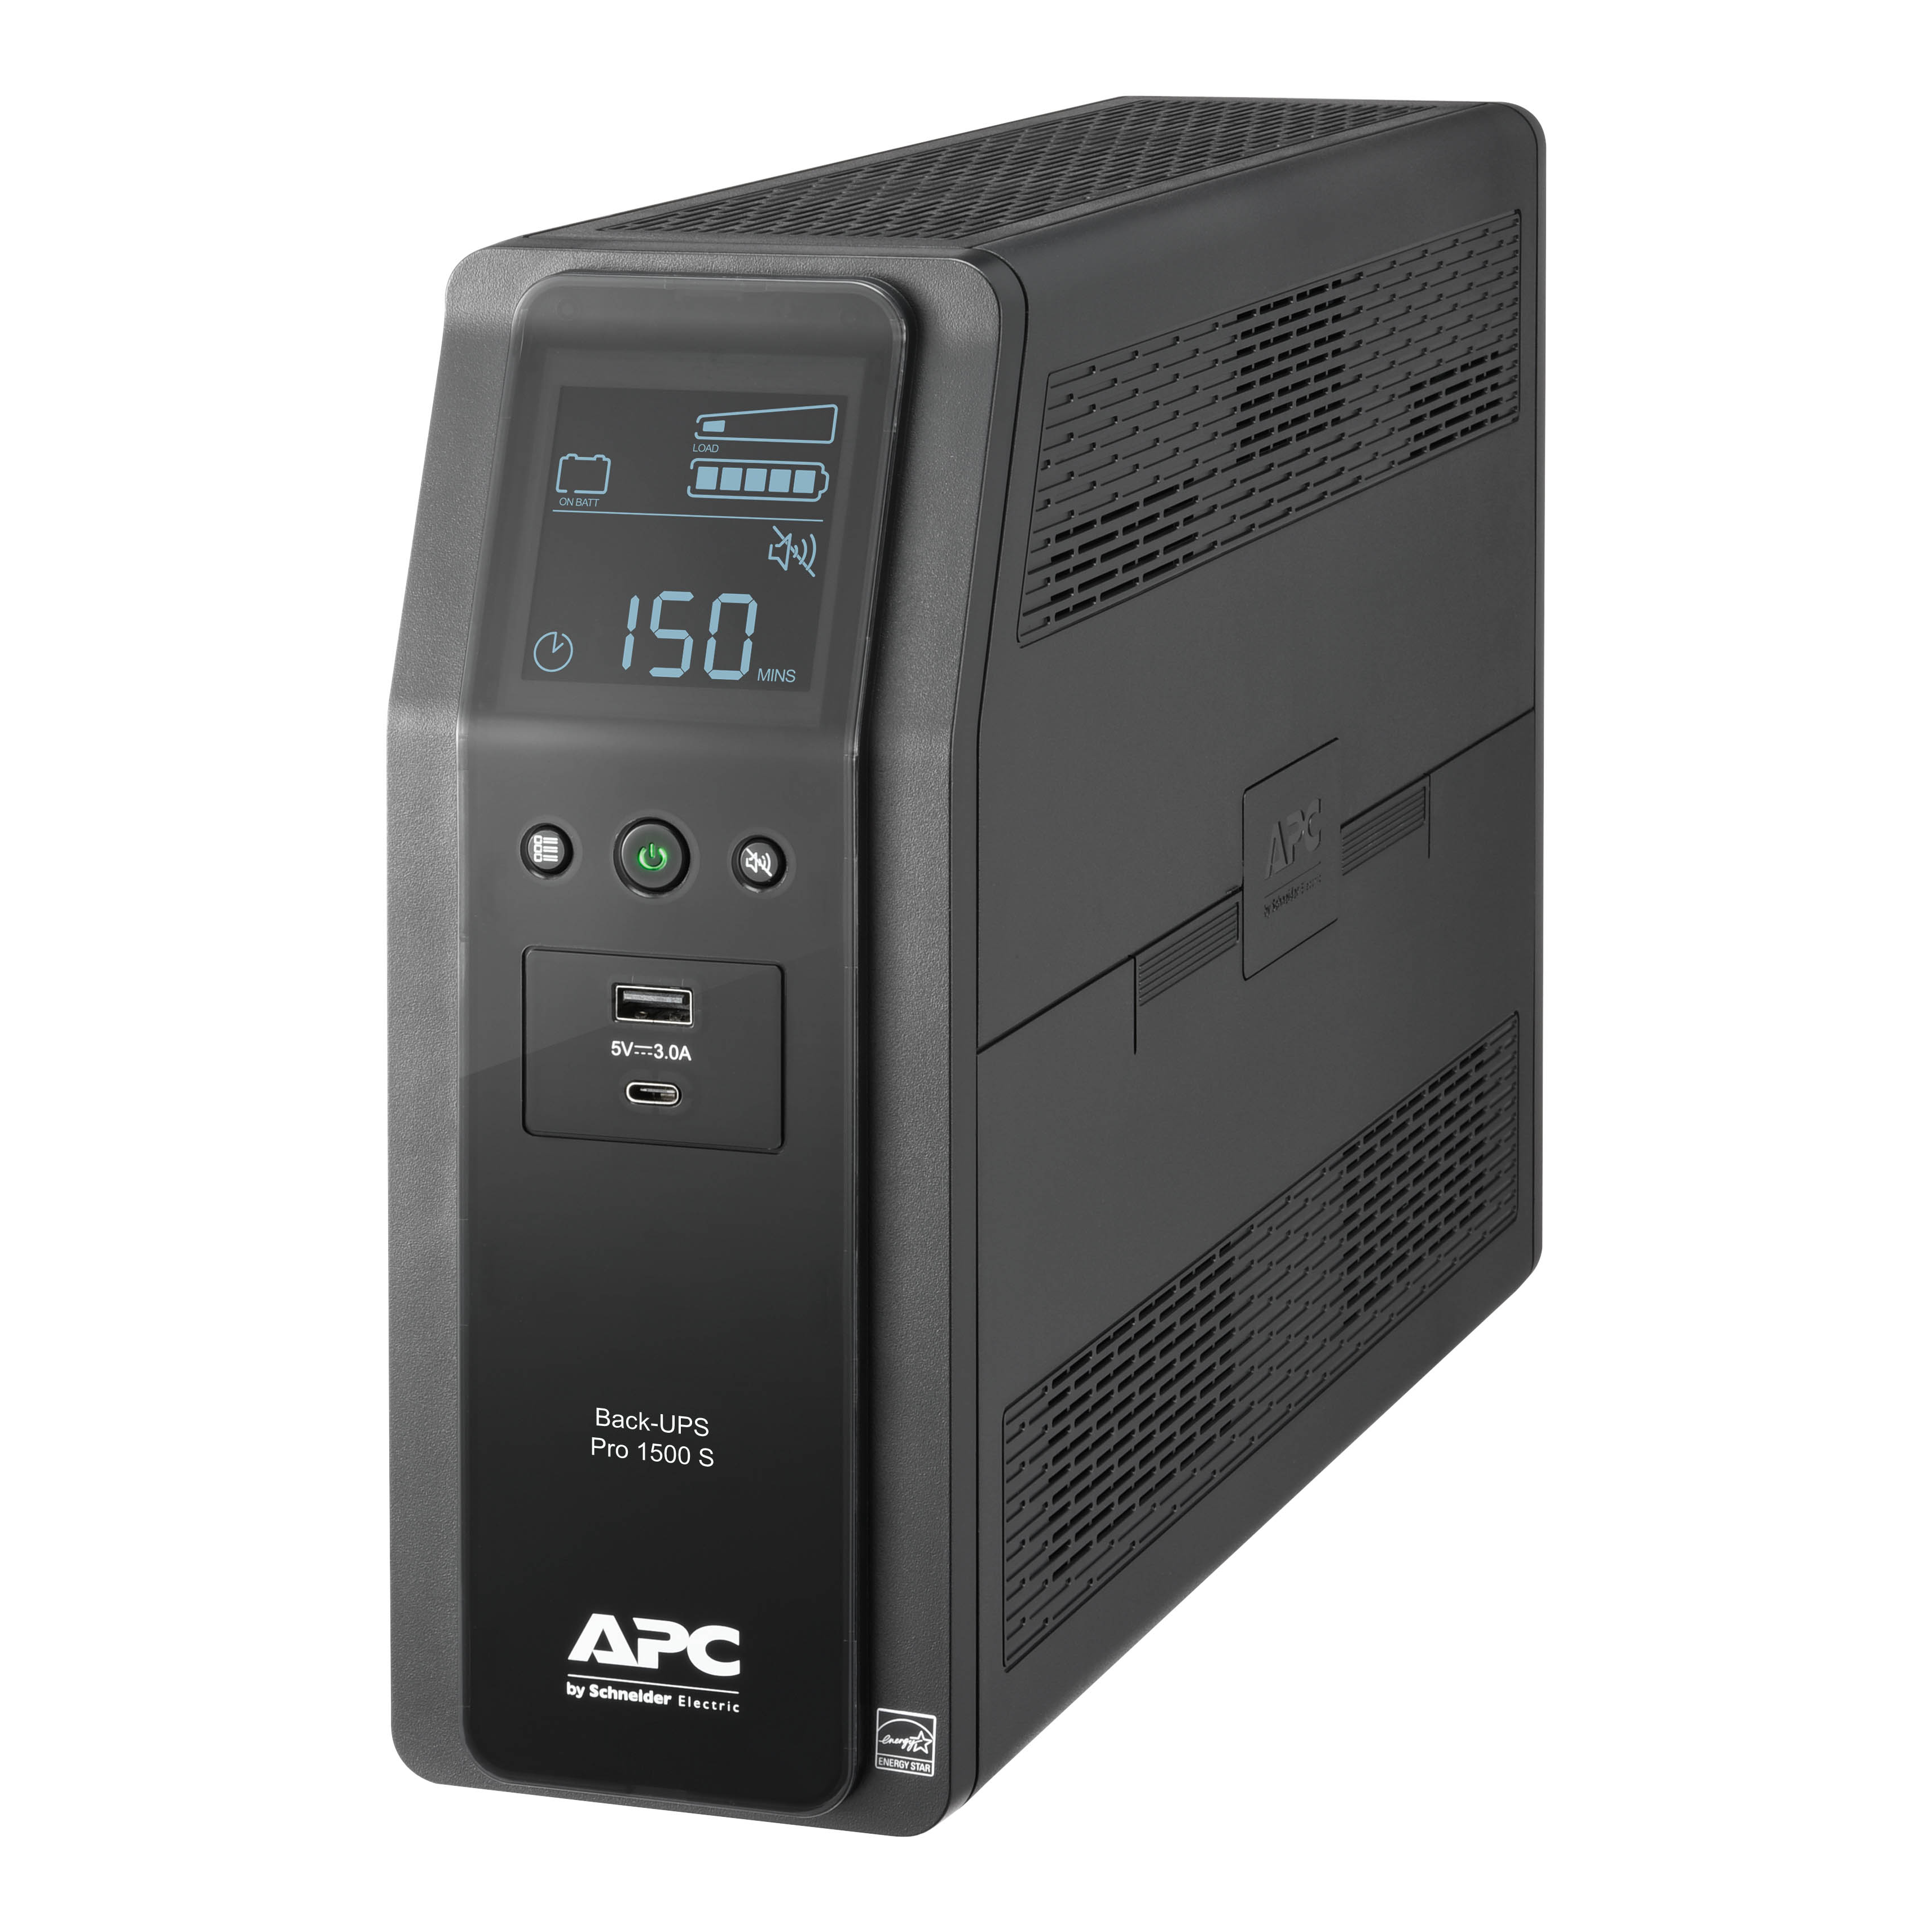 APC Back-UPS Pro, 1500VA/900W, Tower, 120V, 10x NEMA 5-15R outlets, AVR, USB Type A + C ports, LCD, User Replaceable Battery